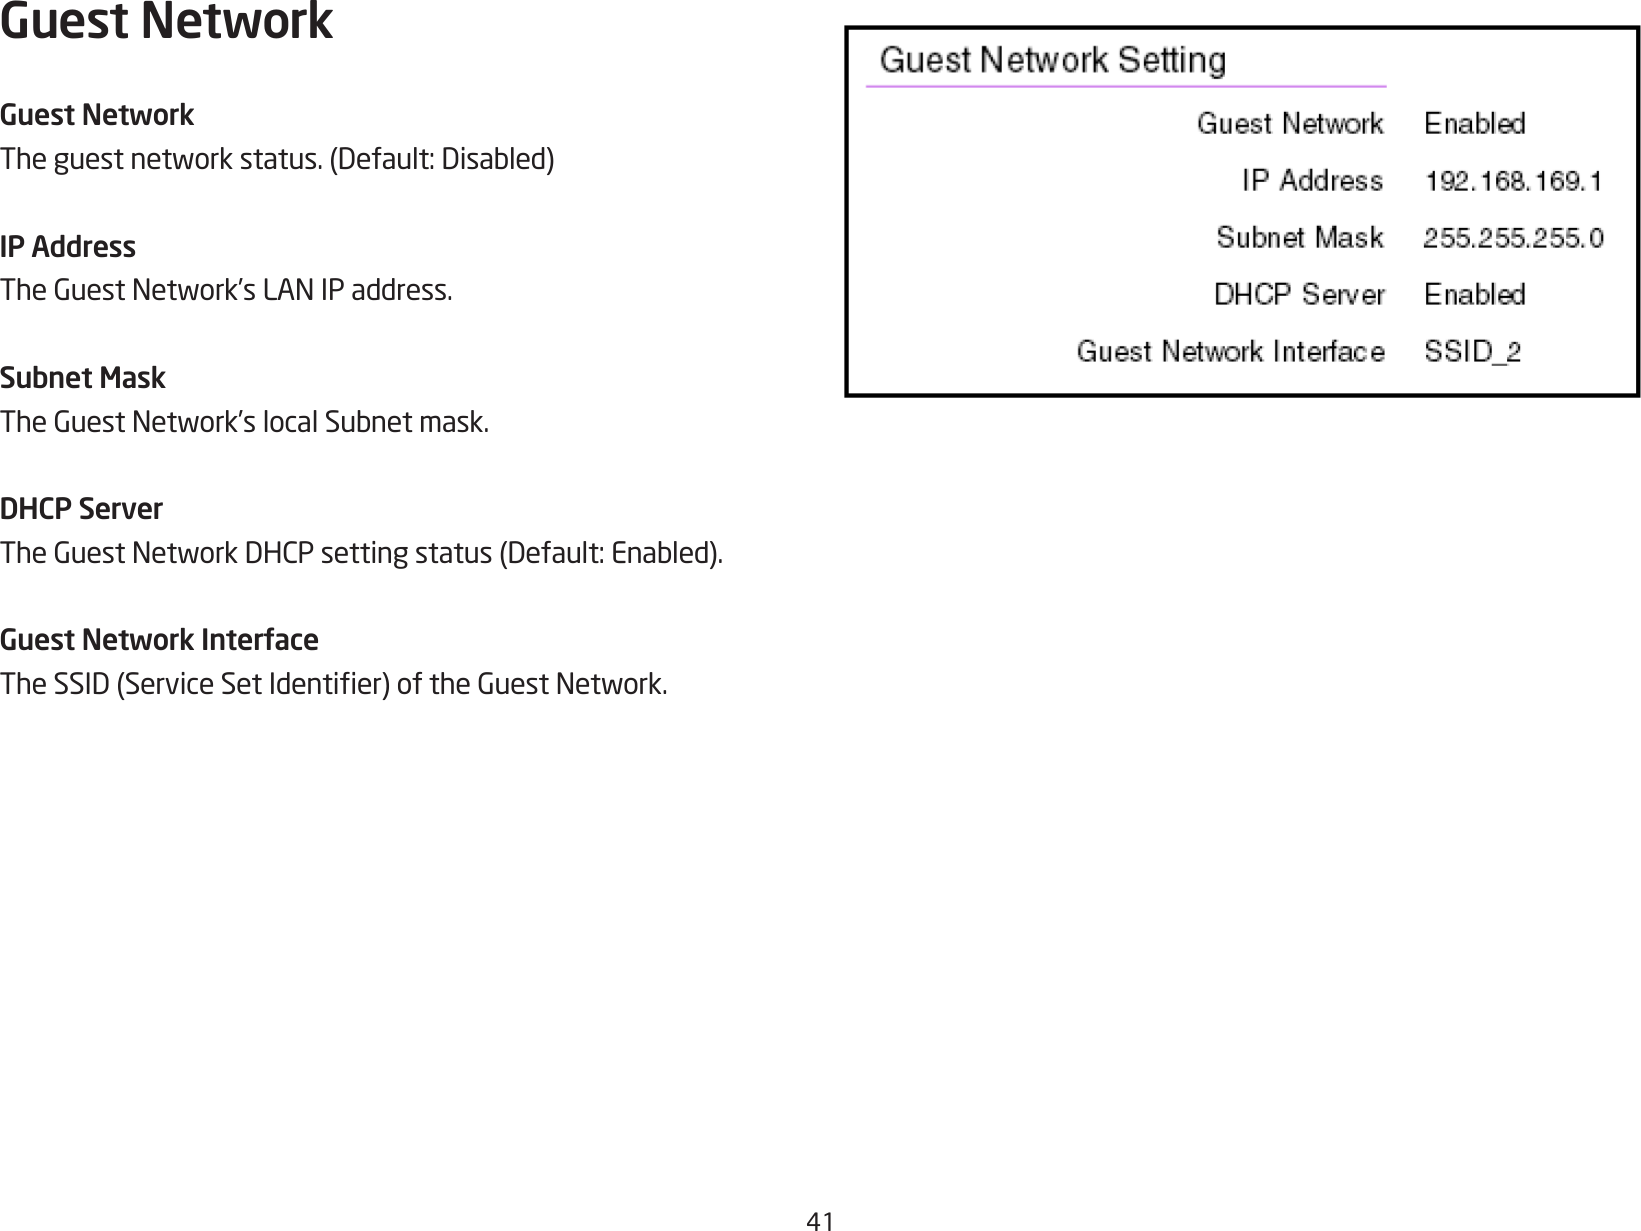 41Guest NetworkGuest NetworkTheguestnetworkstatus.(Default:Disabled)IP AddressTheGuestNetwork’sLANIPaddress.Subnet MaskTheGuestNetwork’slocalSubnetmask.DHCP ServerTheGuestNetworkDHCPsettingstatus(Default:Enabled).Guest Network InterfaceTheSSID(ServiceSetIdentier)oftheGuestNetwork.